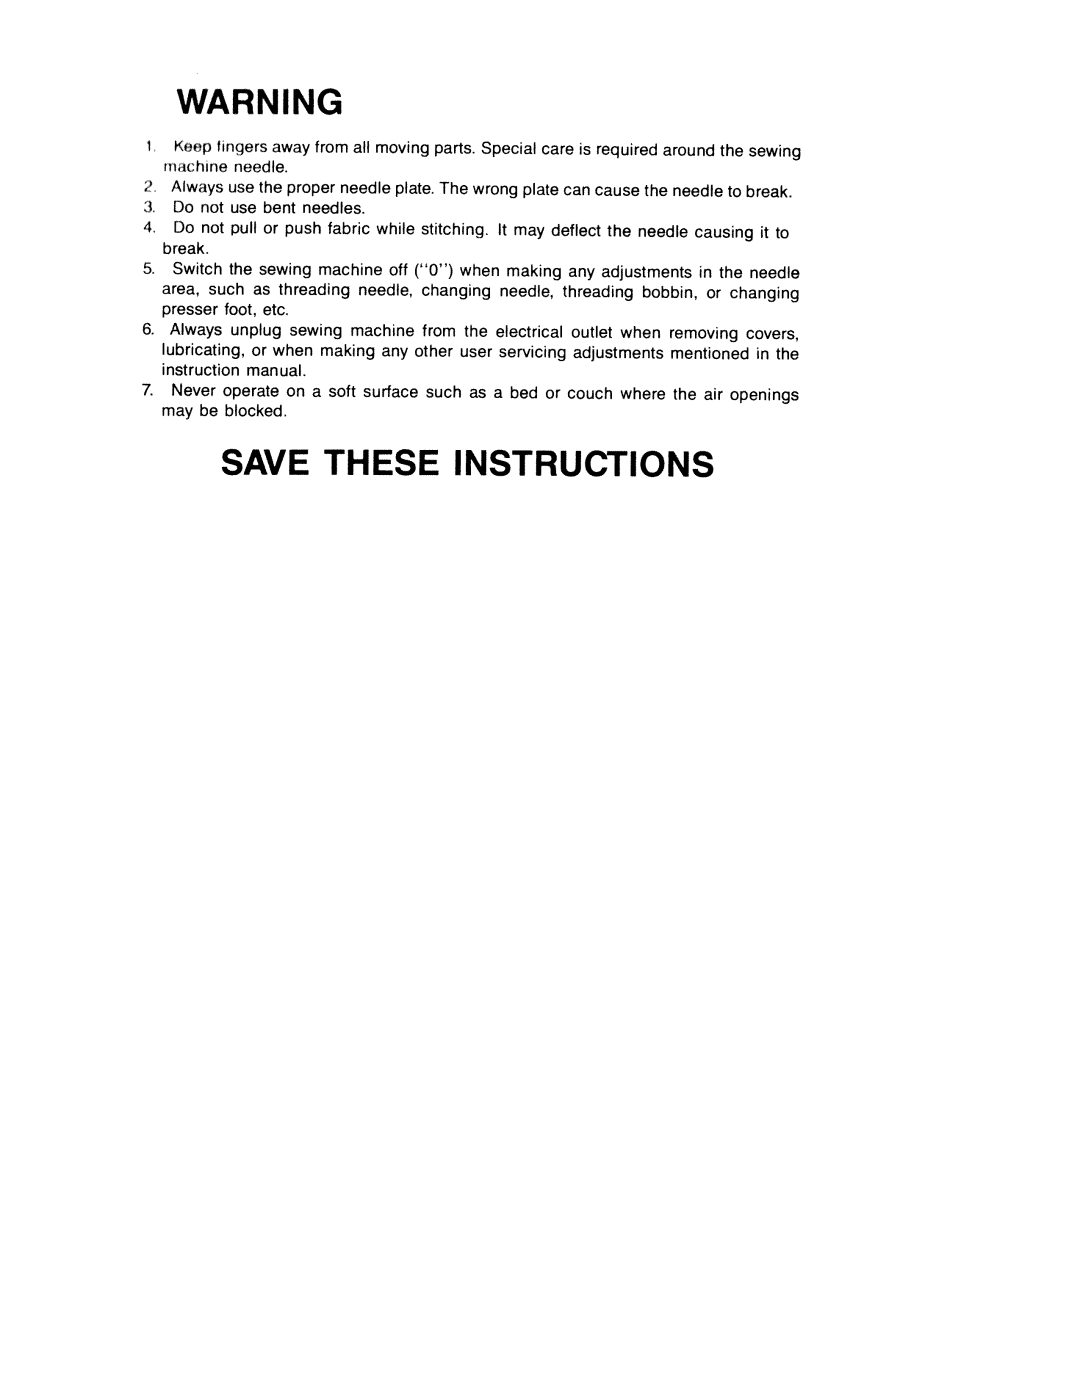 White-Westinghouse WW-6000 manual Instructions, Save, These 